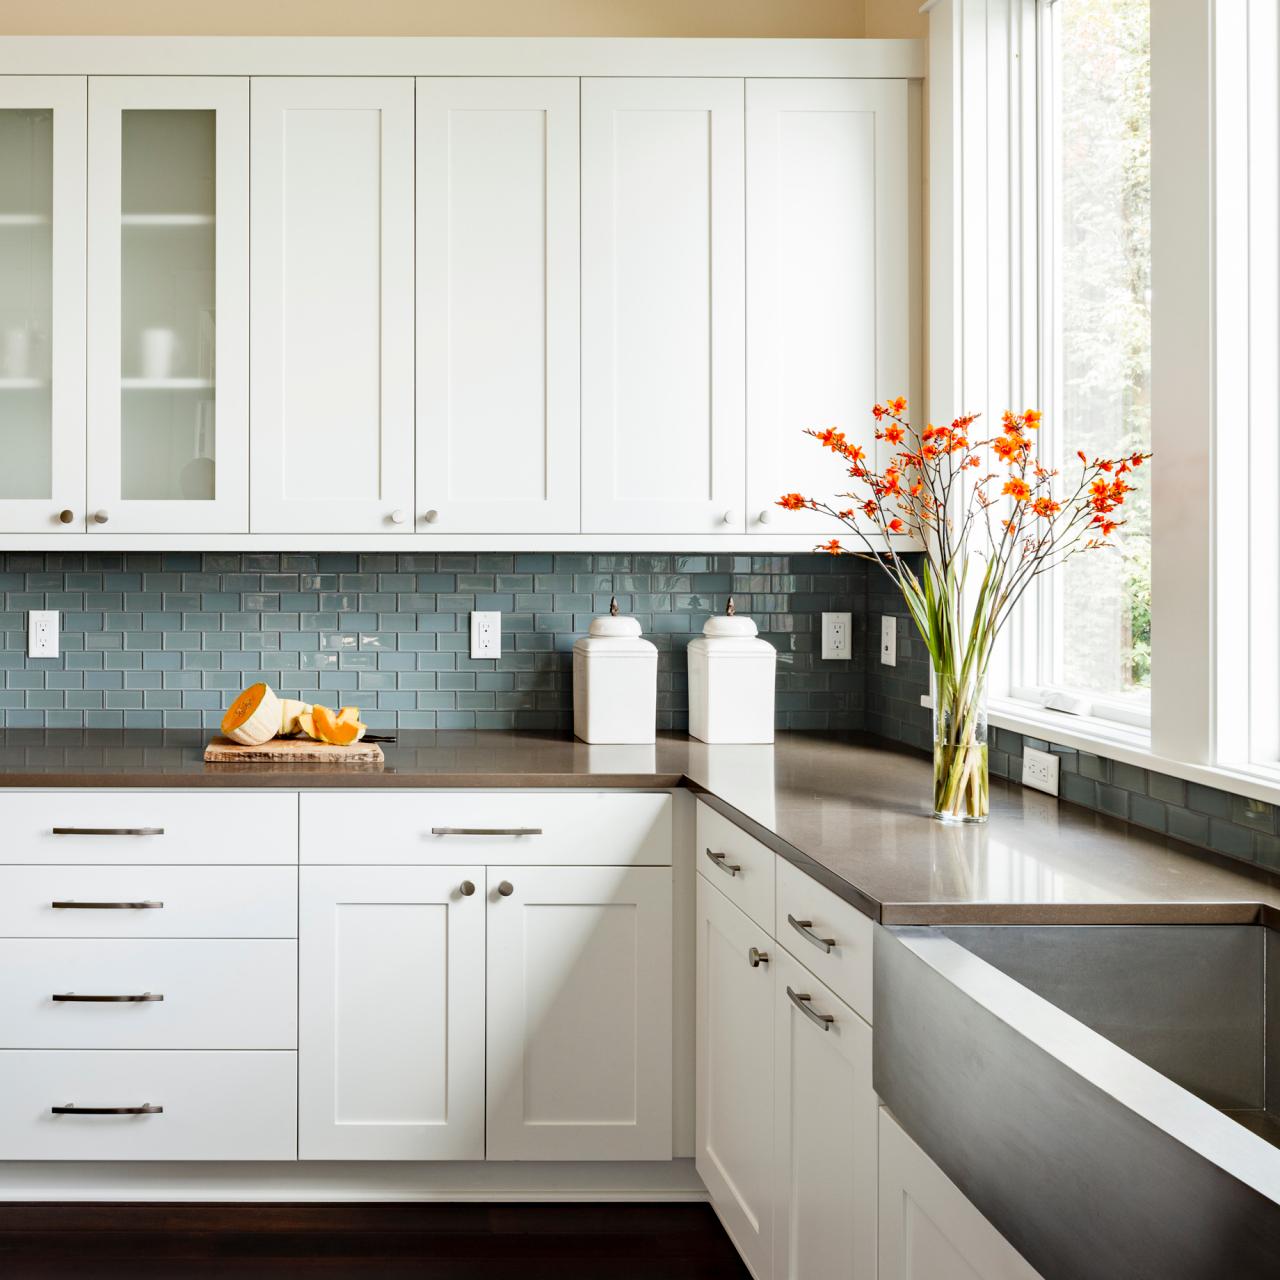 Kitchen Cabinet Materials: Pictures, Options, Tips & Ideas  HGTV